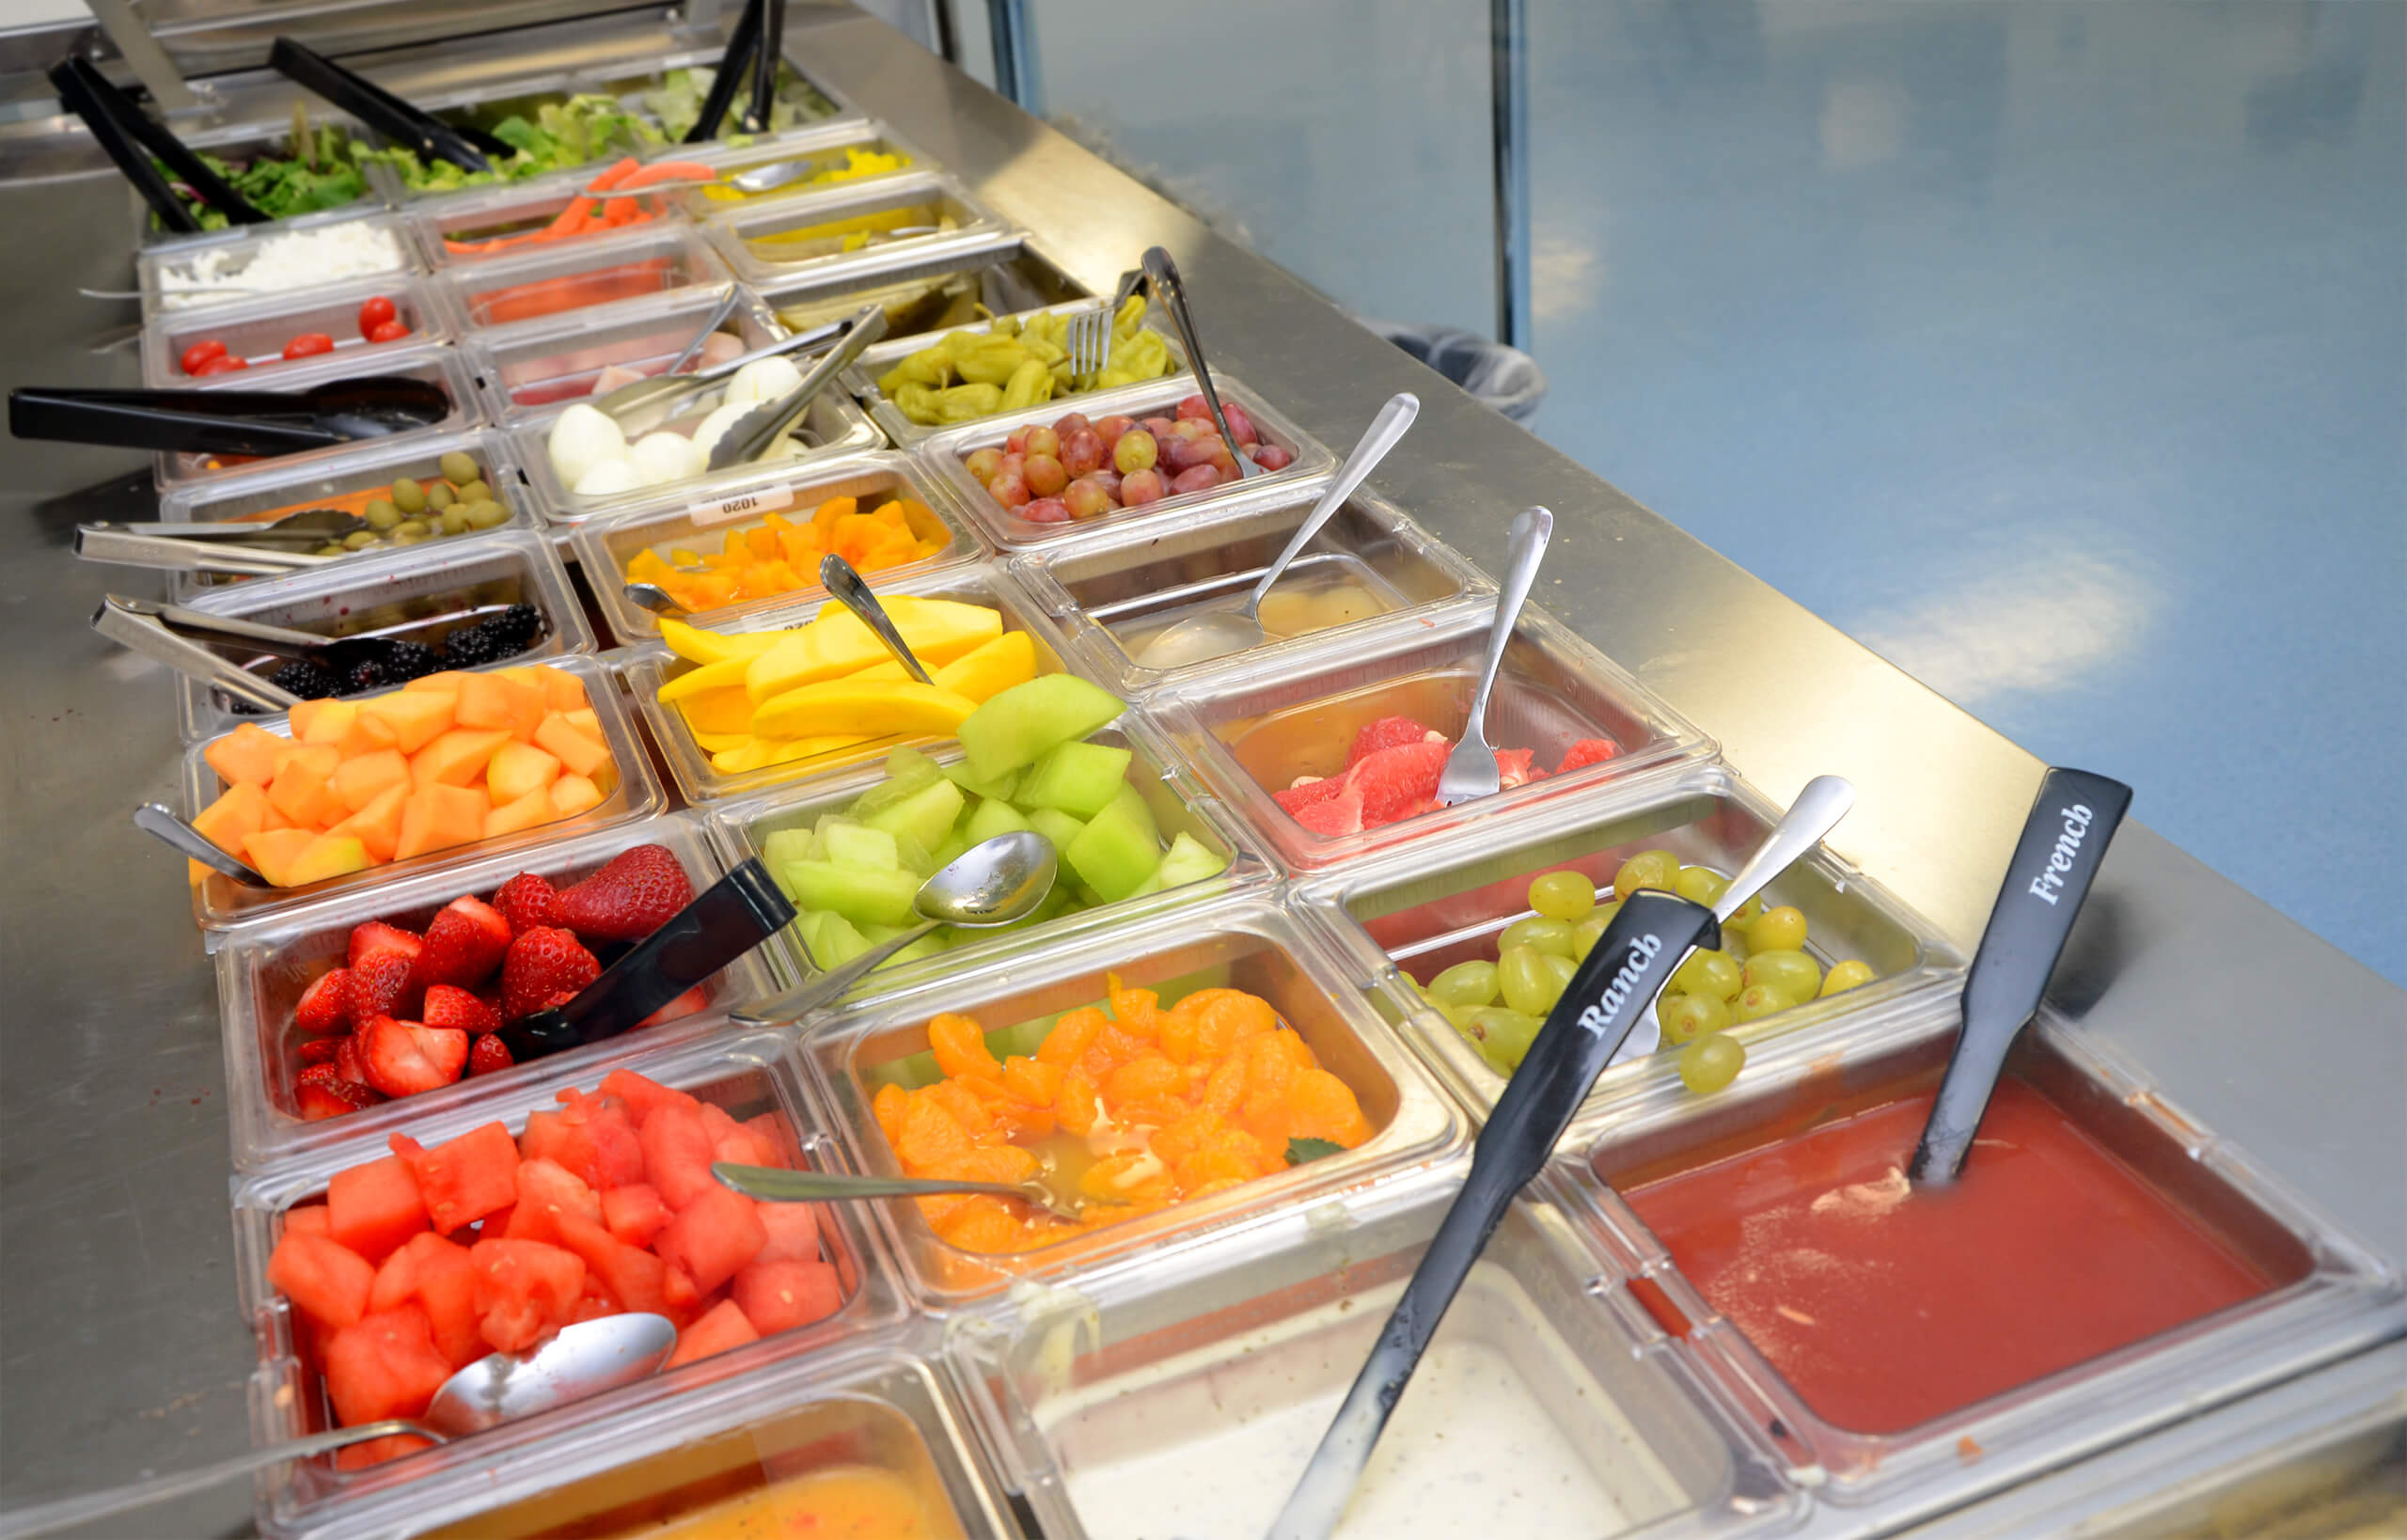 Fresh fruits and veggies, and a wicked-good salad bar.